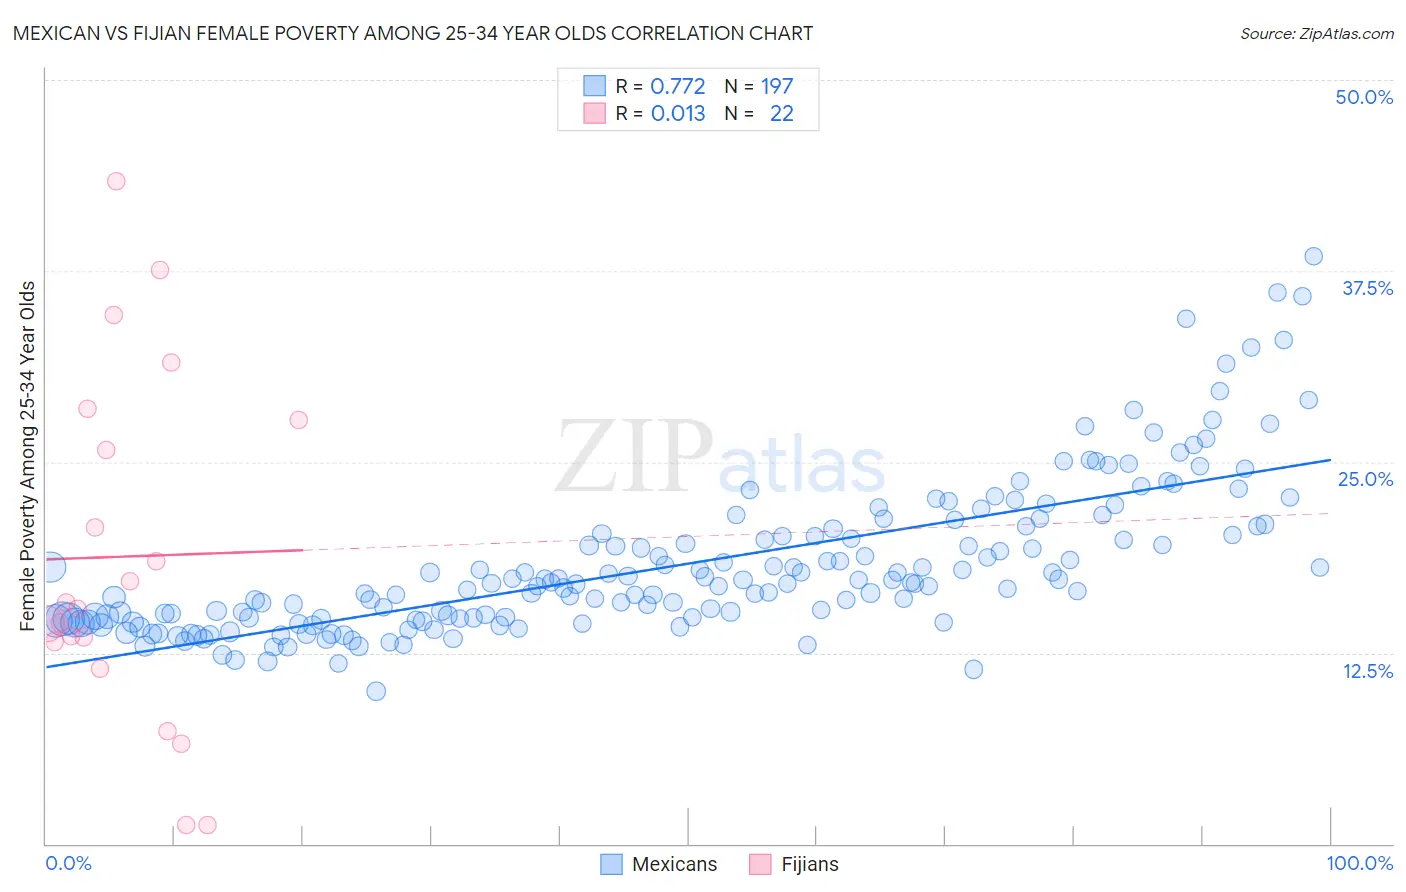 Mexican vs Fijian Female Poverty Among 25-34 Year Olds